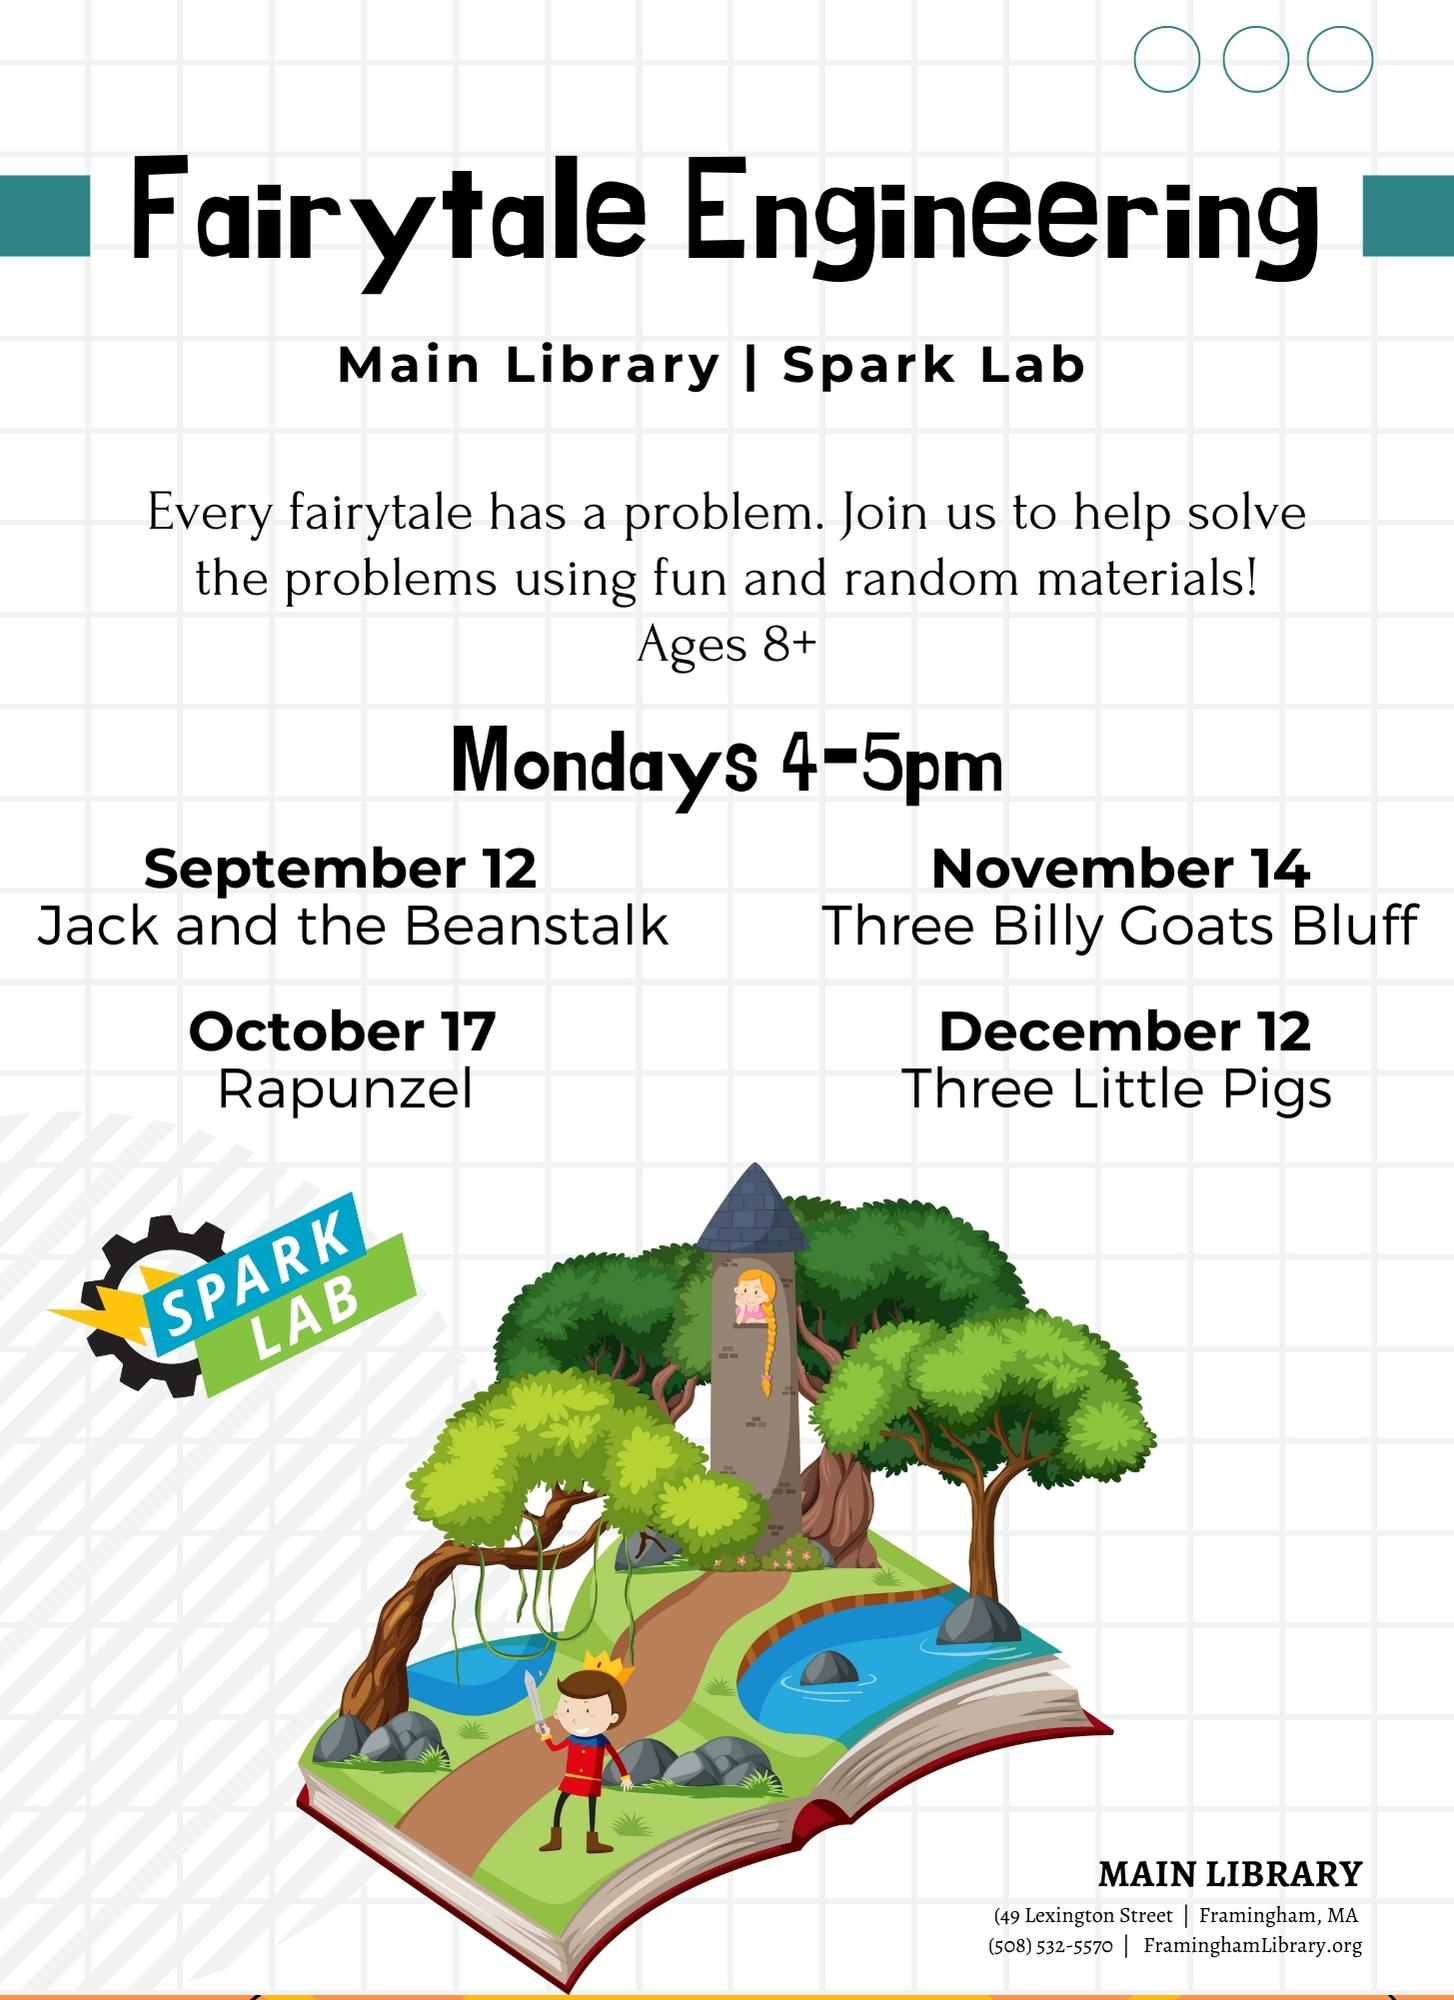  Fairytale Engineering October 17, 2022 , 4:00 pm - 5:00 pm / Main Library | Spark Lab  Every fairytale has a problem, join us to help solve the problems using fun and strange materials! Ages 8+  Join us September 12 Jack & the Beanstalk, October 17 for Rapunzel, November 14 for Three Billy Goats Bluff, and December 12 for Three Little Pigs.